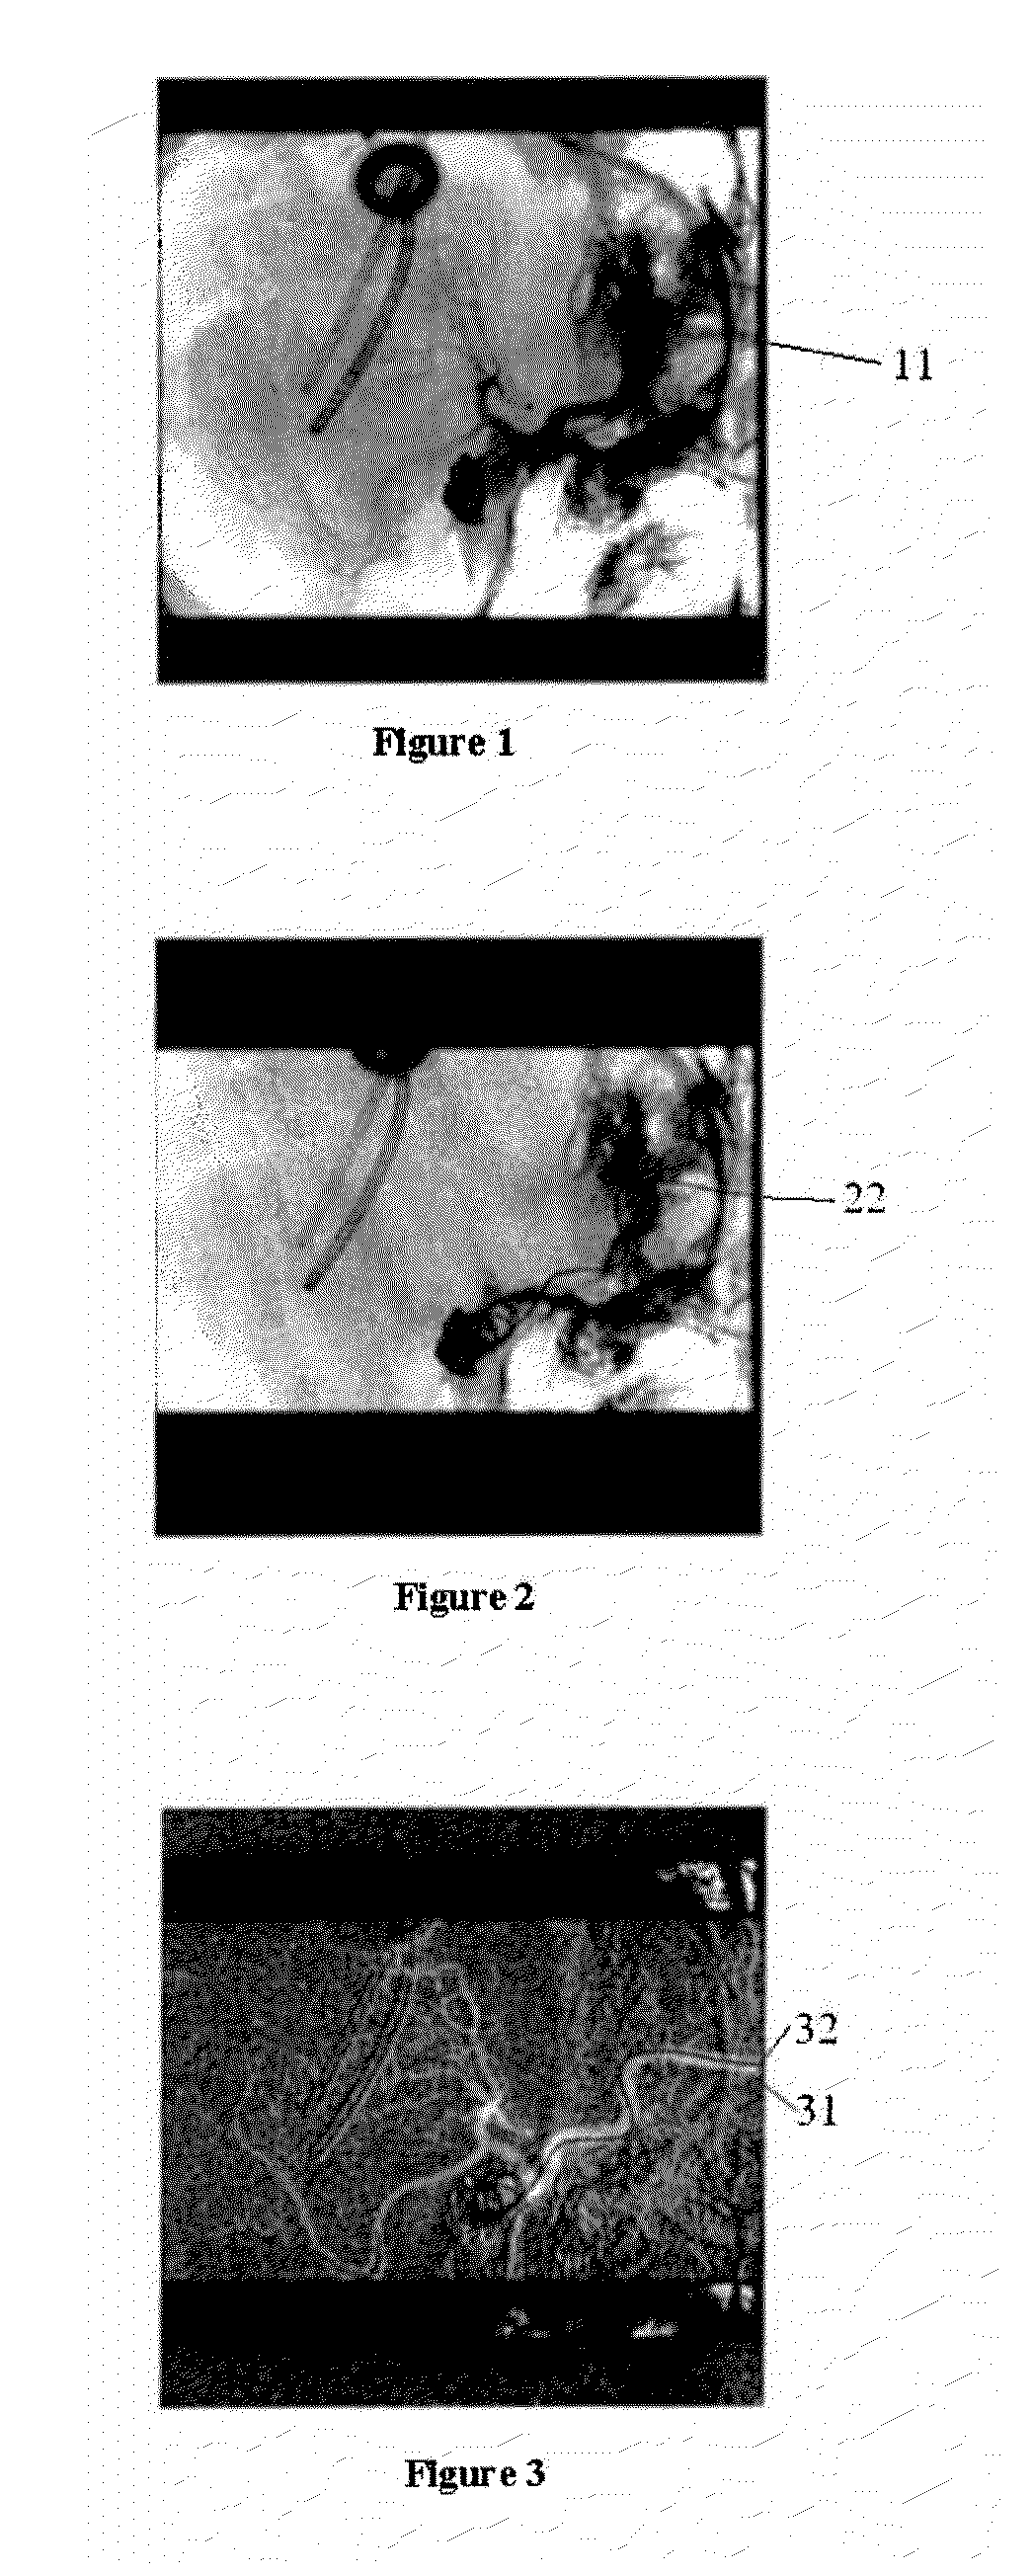 System and method for decomposed temporal filtering for X-ray guided intervention application